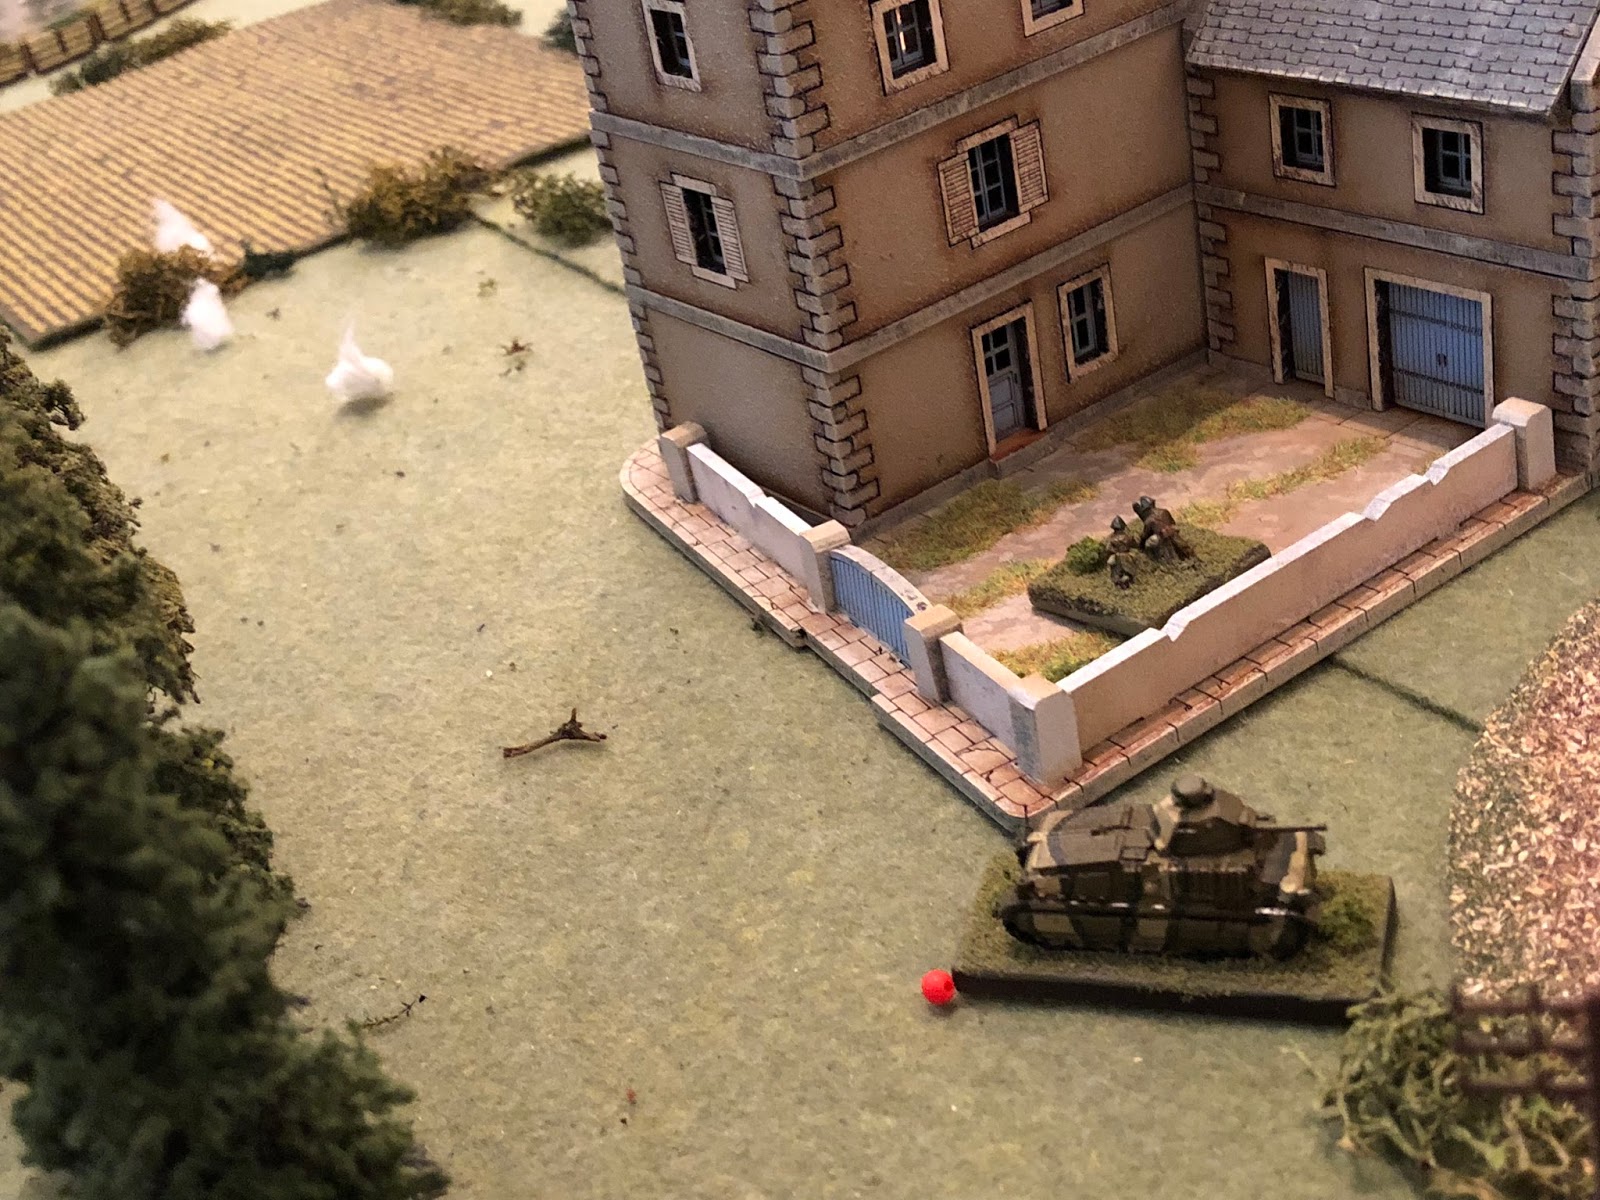  But at the same time, one of Sgt Graebner's 75mm shells skips off the turret of the northern Somua, forcing him to fall back (bottom center, from top left)!!! 